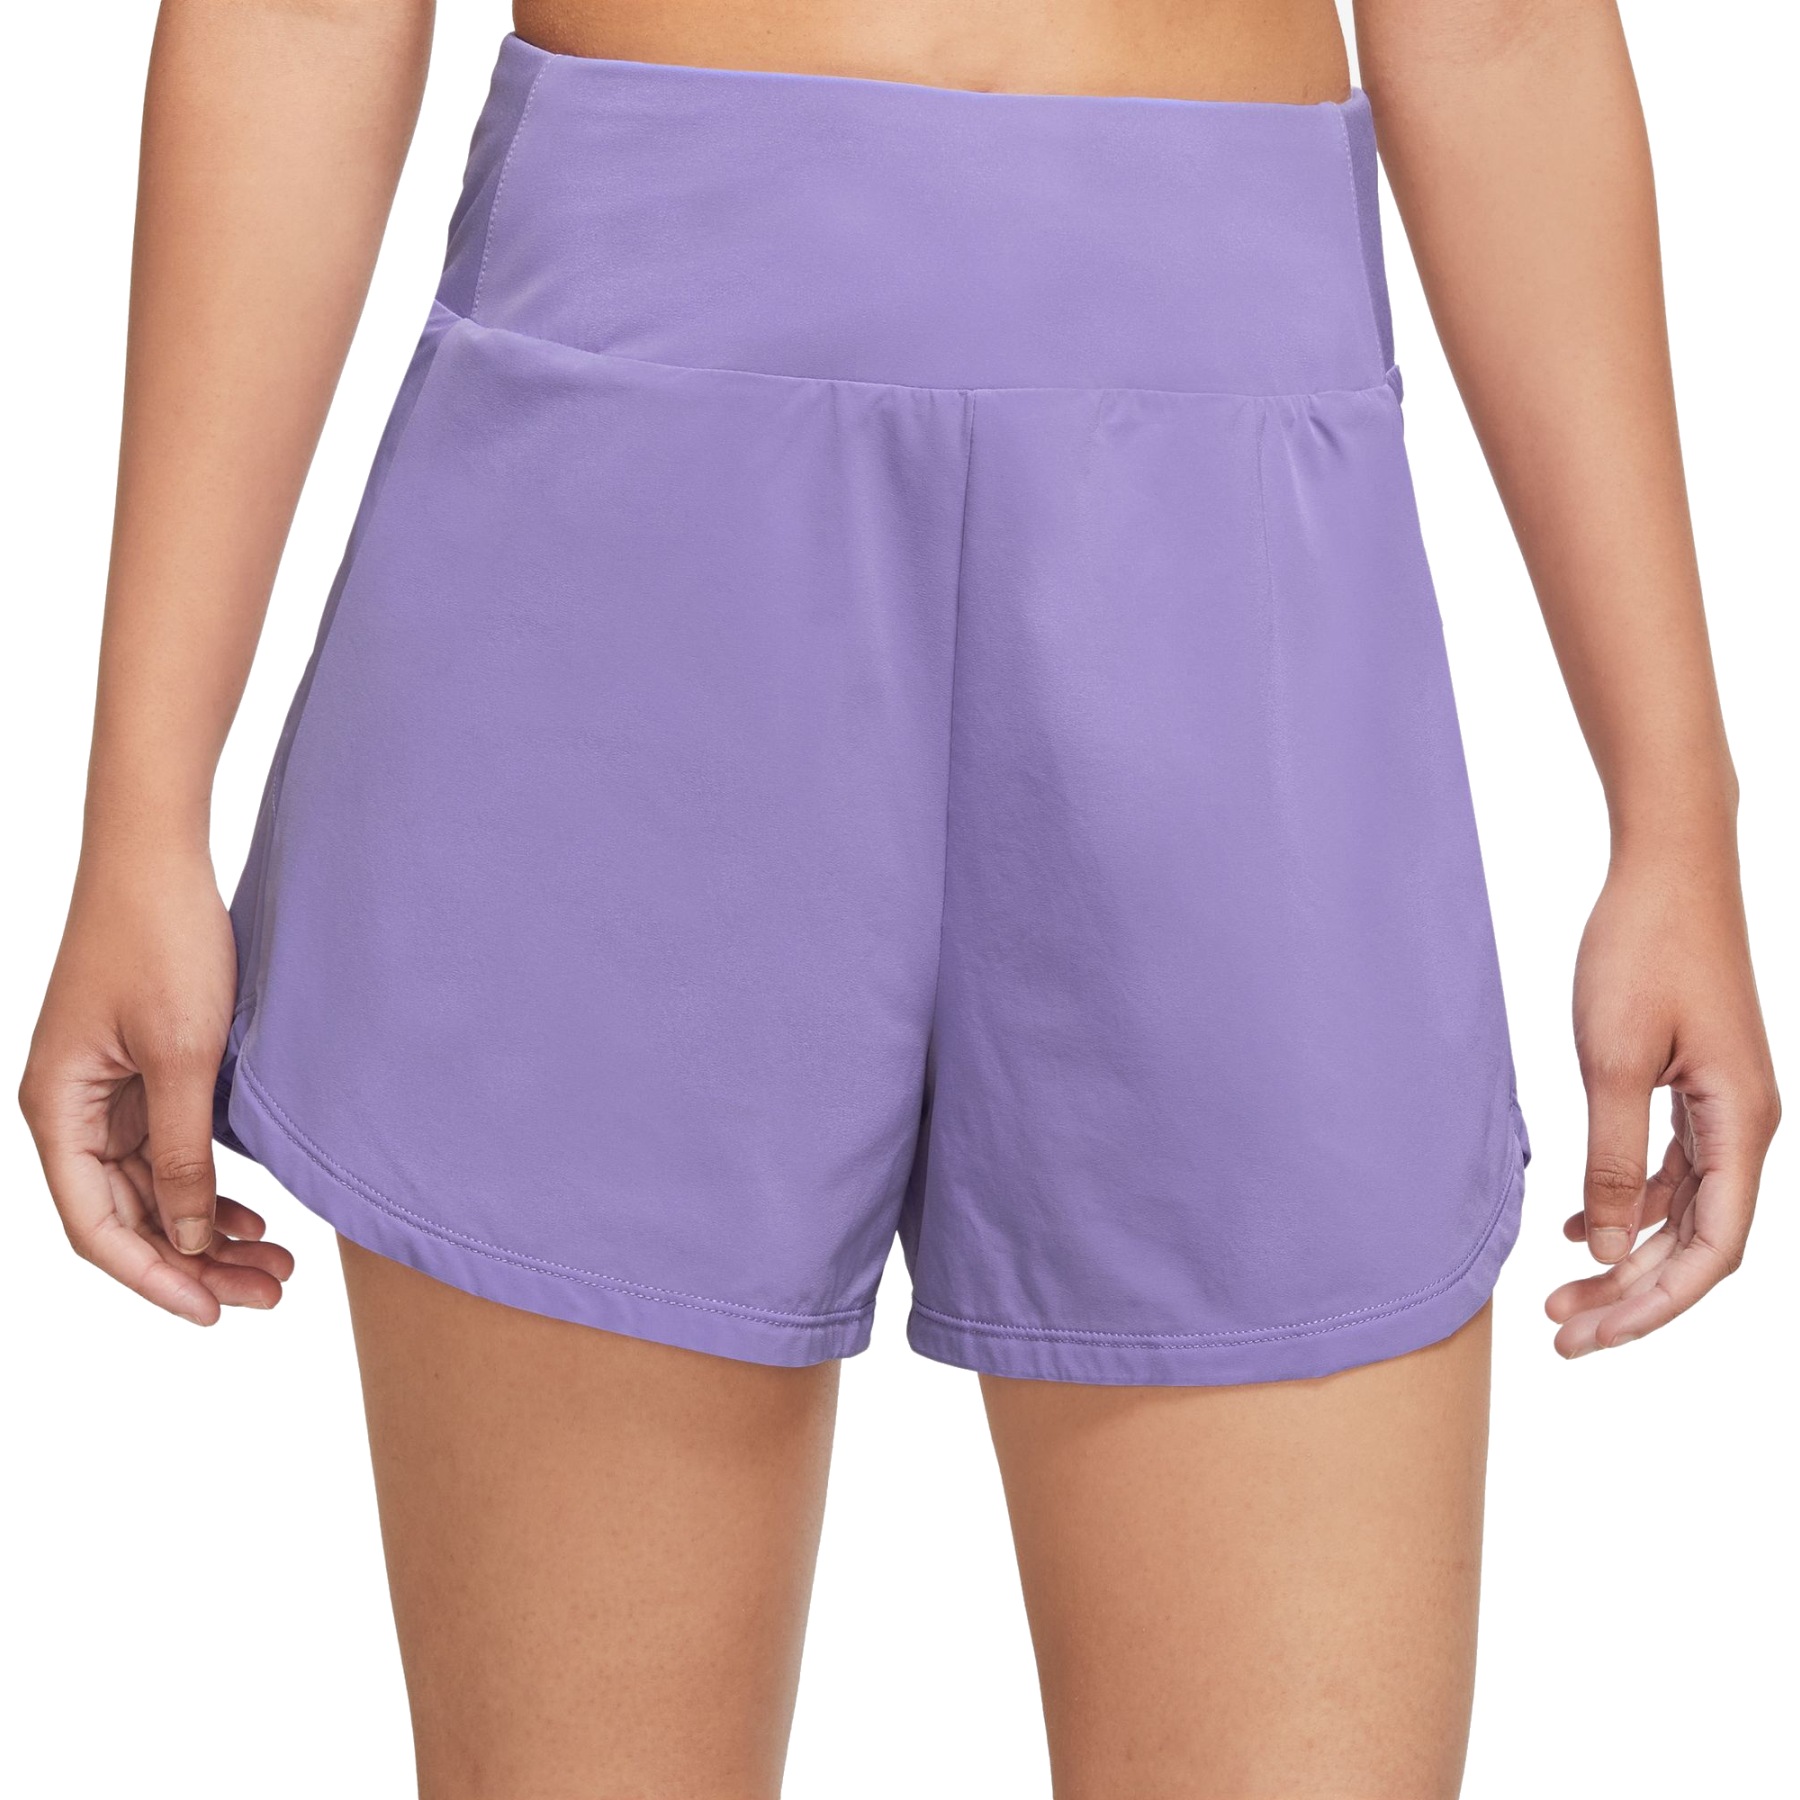 Nike Bliss Dri-FIT Women's High-Waisted 3 Brief-Lined Shorts - space  purple/reflective silver DX6018-567